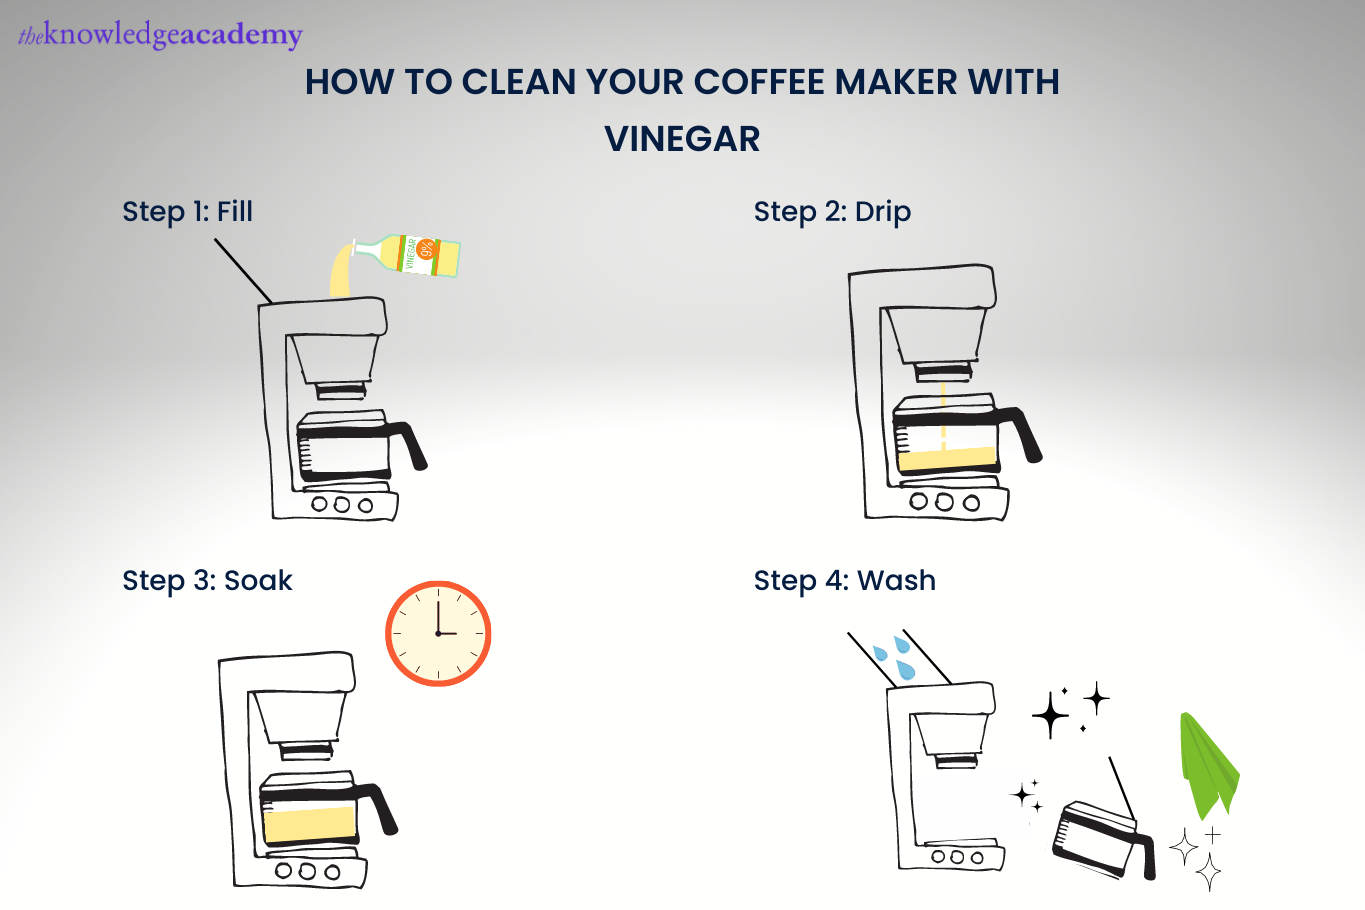 How to Clean a Coffee Maker with Vinegar